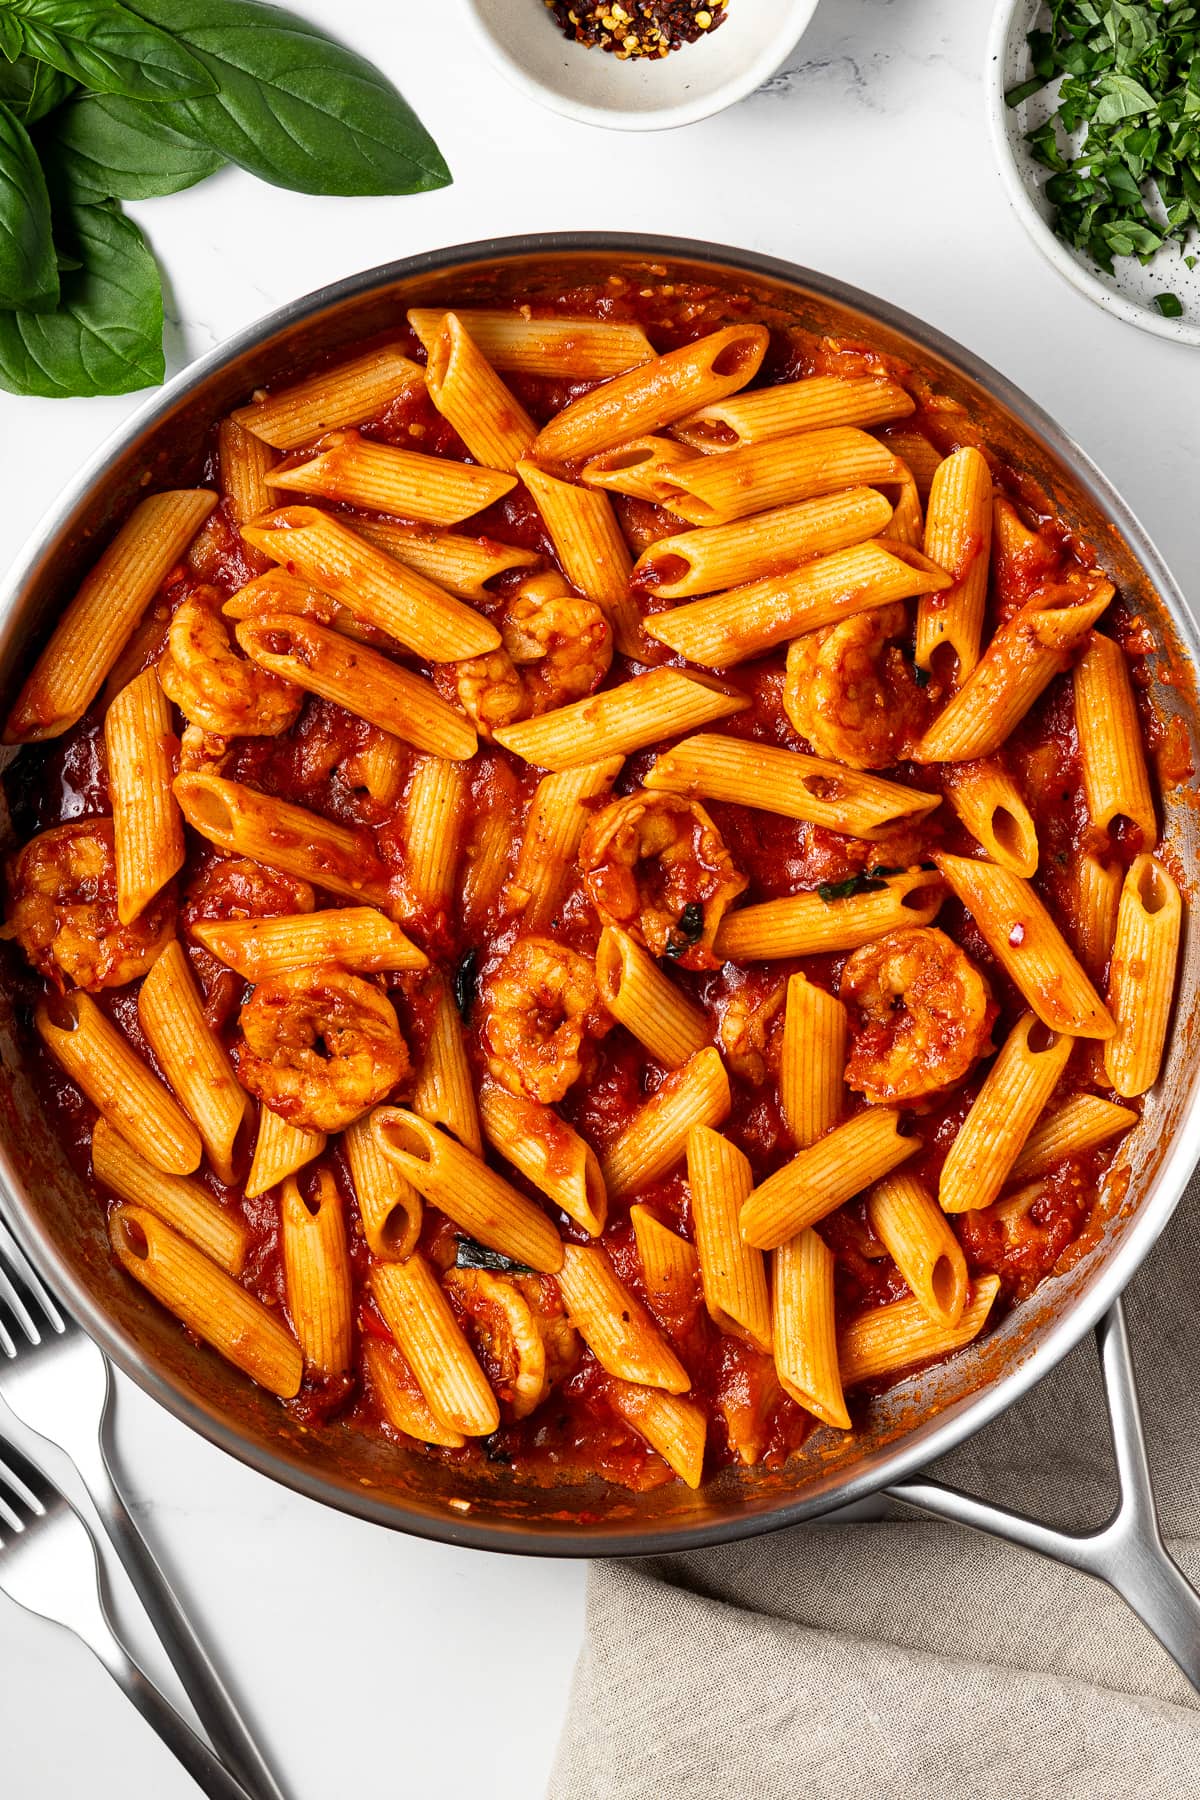 shrimp arrabbiata in a pan on a table and fresh basil, red pepper flakes, and two forks on the same table